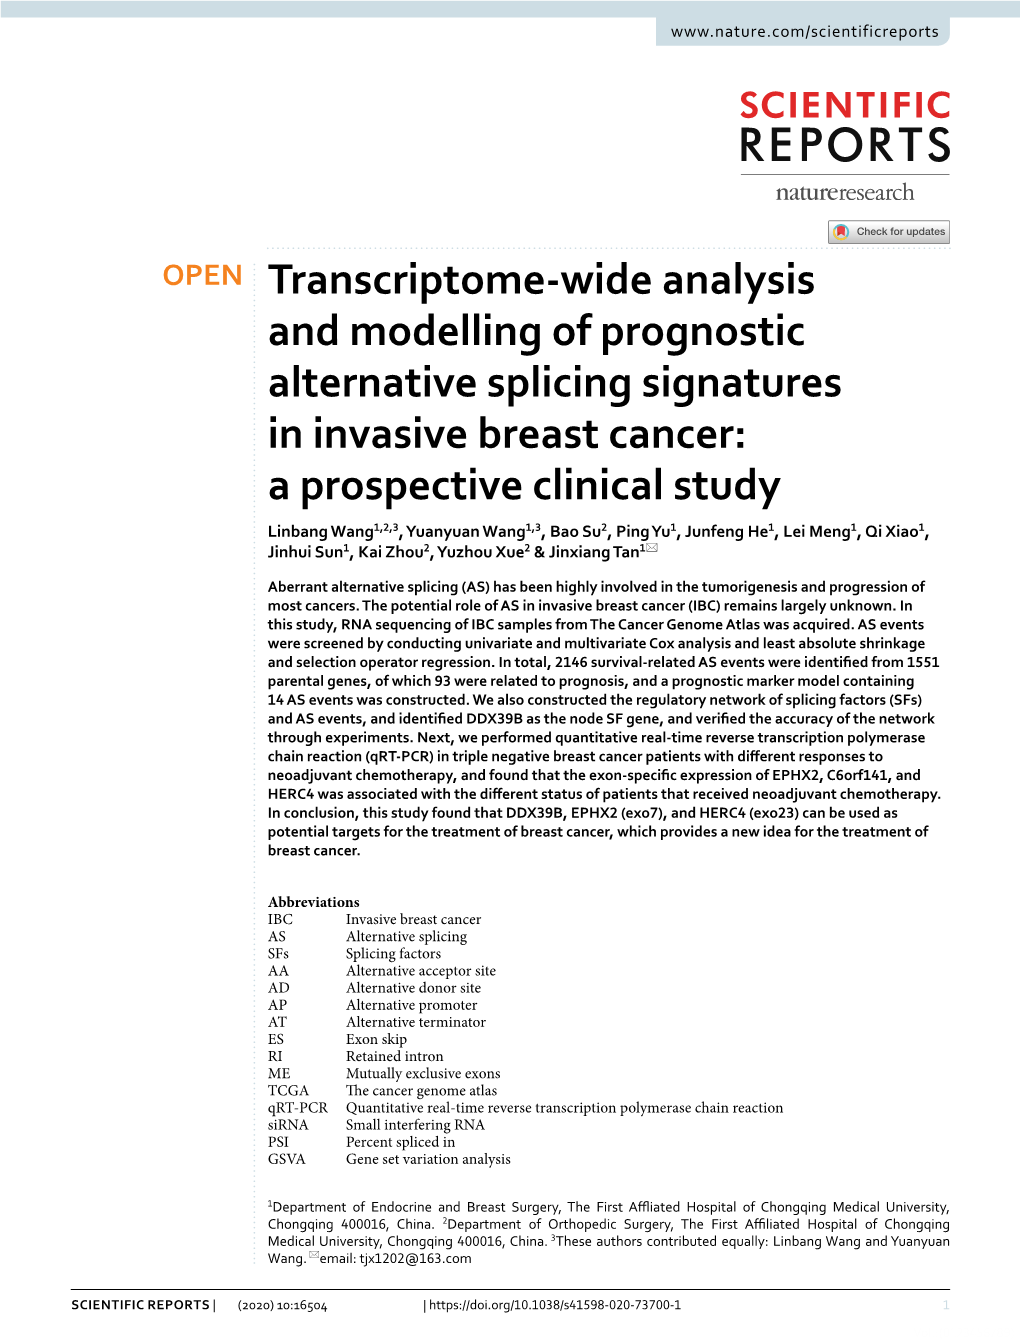 Transcriptome-Wide Analysis and Modelling of Prognostic